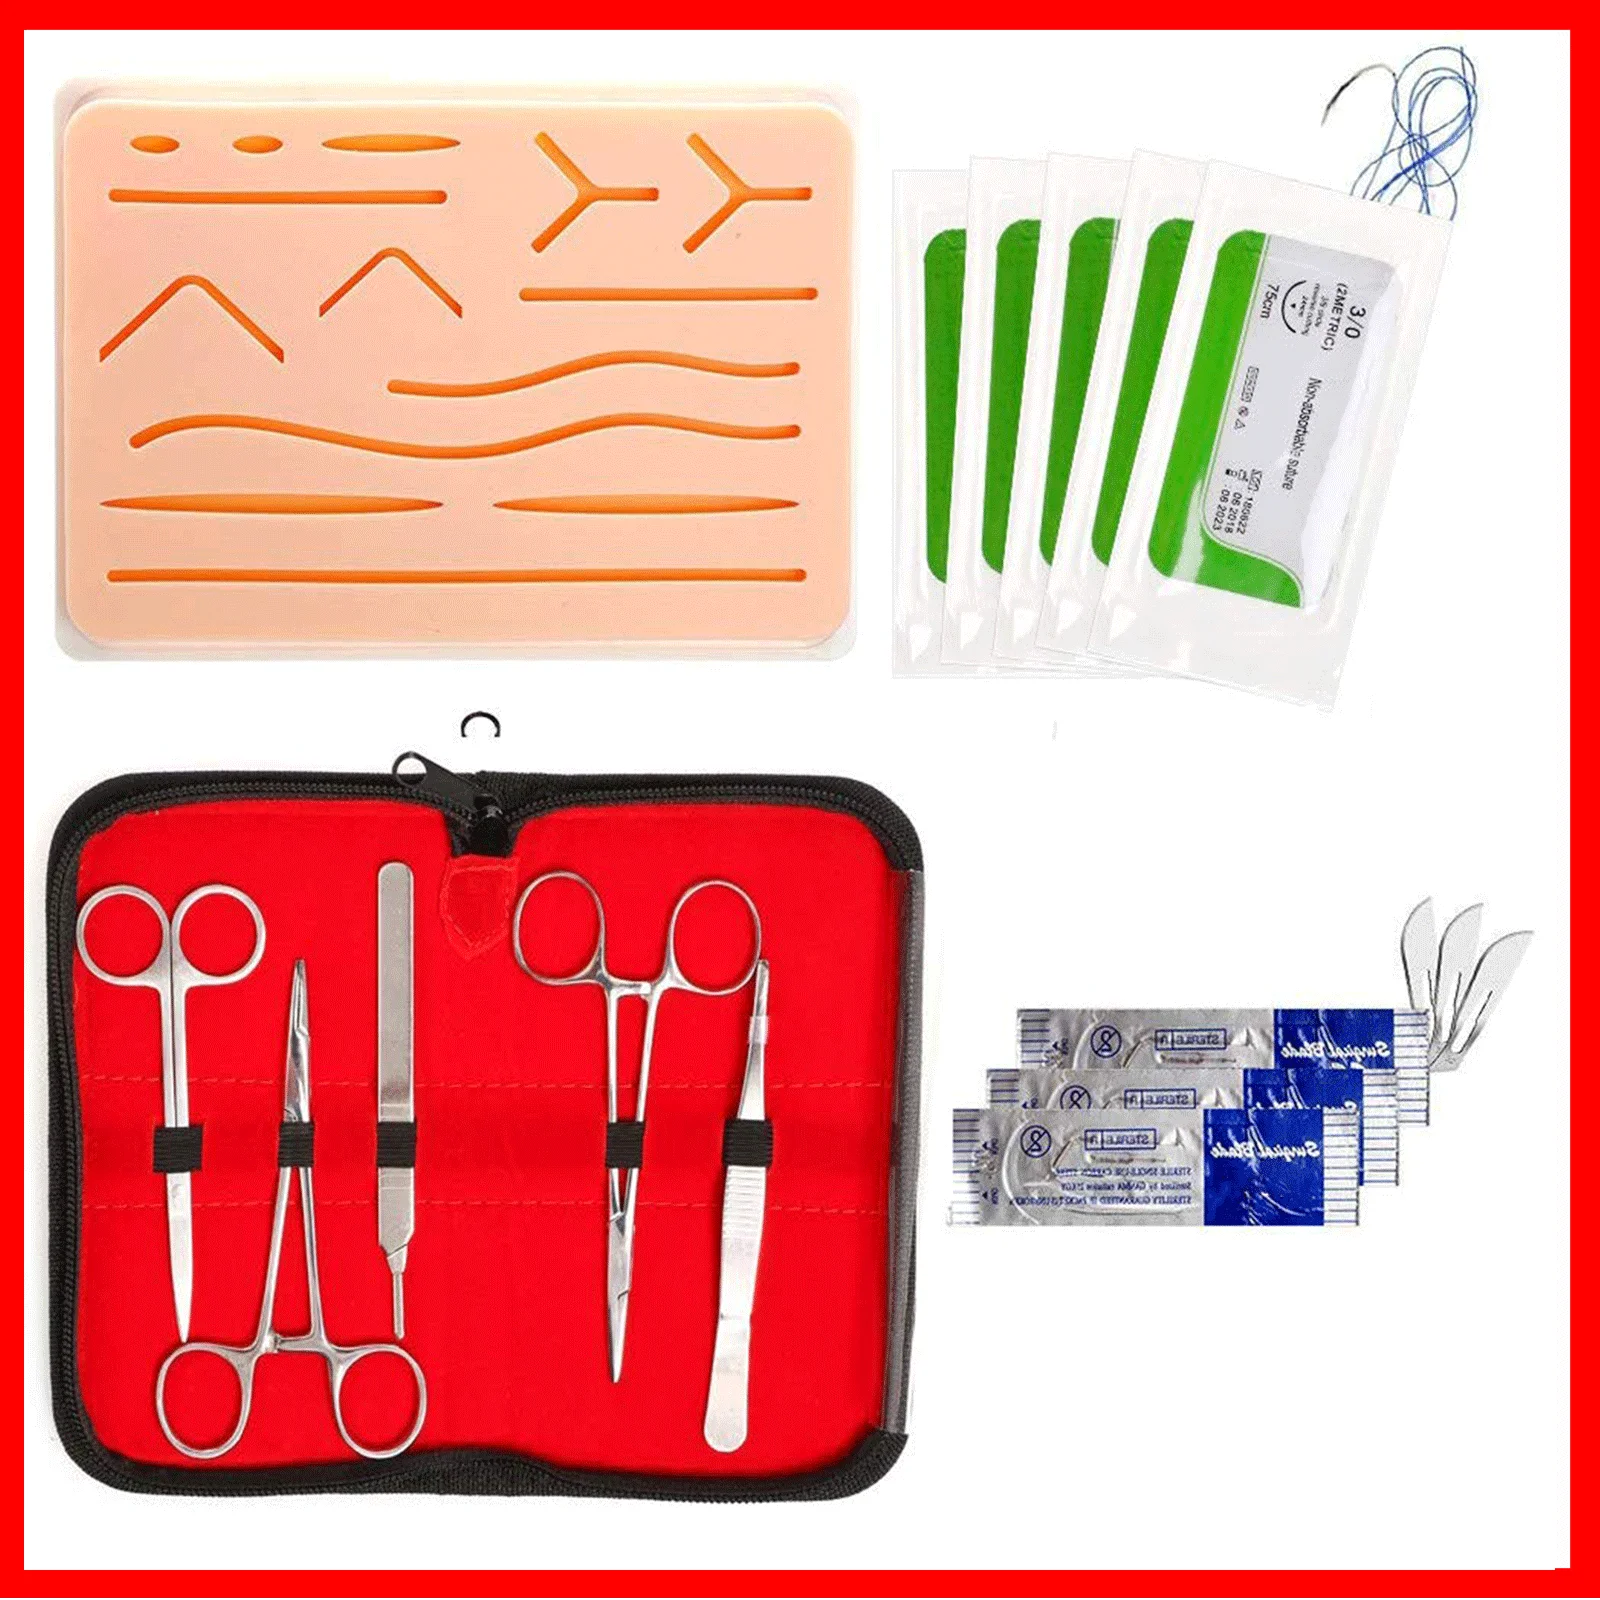 Bar bule Silicon Surgical Suture Training Kit Medical Science Skin Suture Practice Silicone  Pad Needle Scissors Tools School Teaching Equipment - Medical Science -  AliExpress